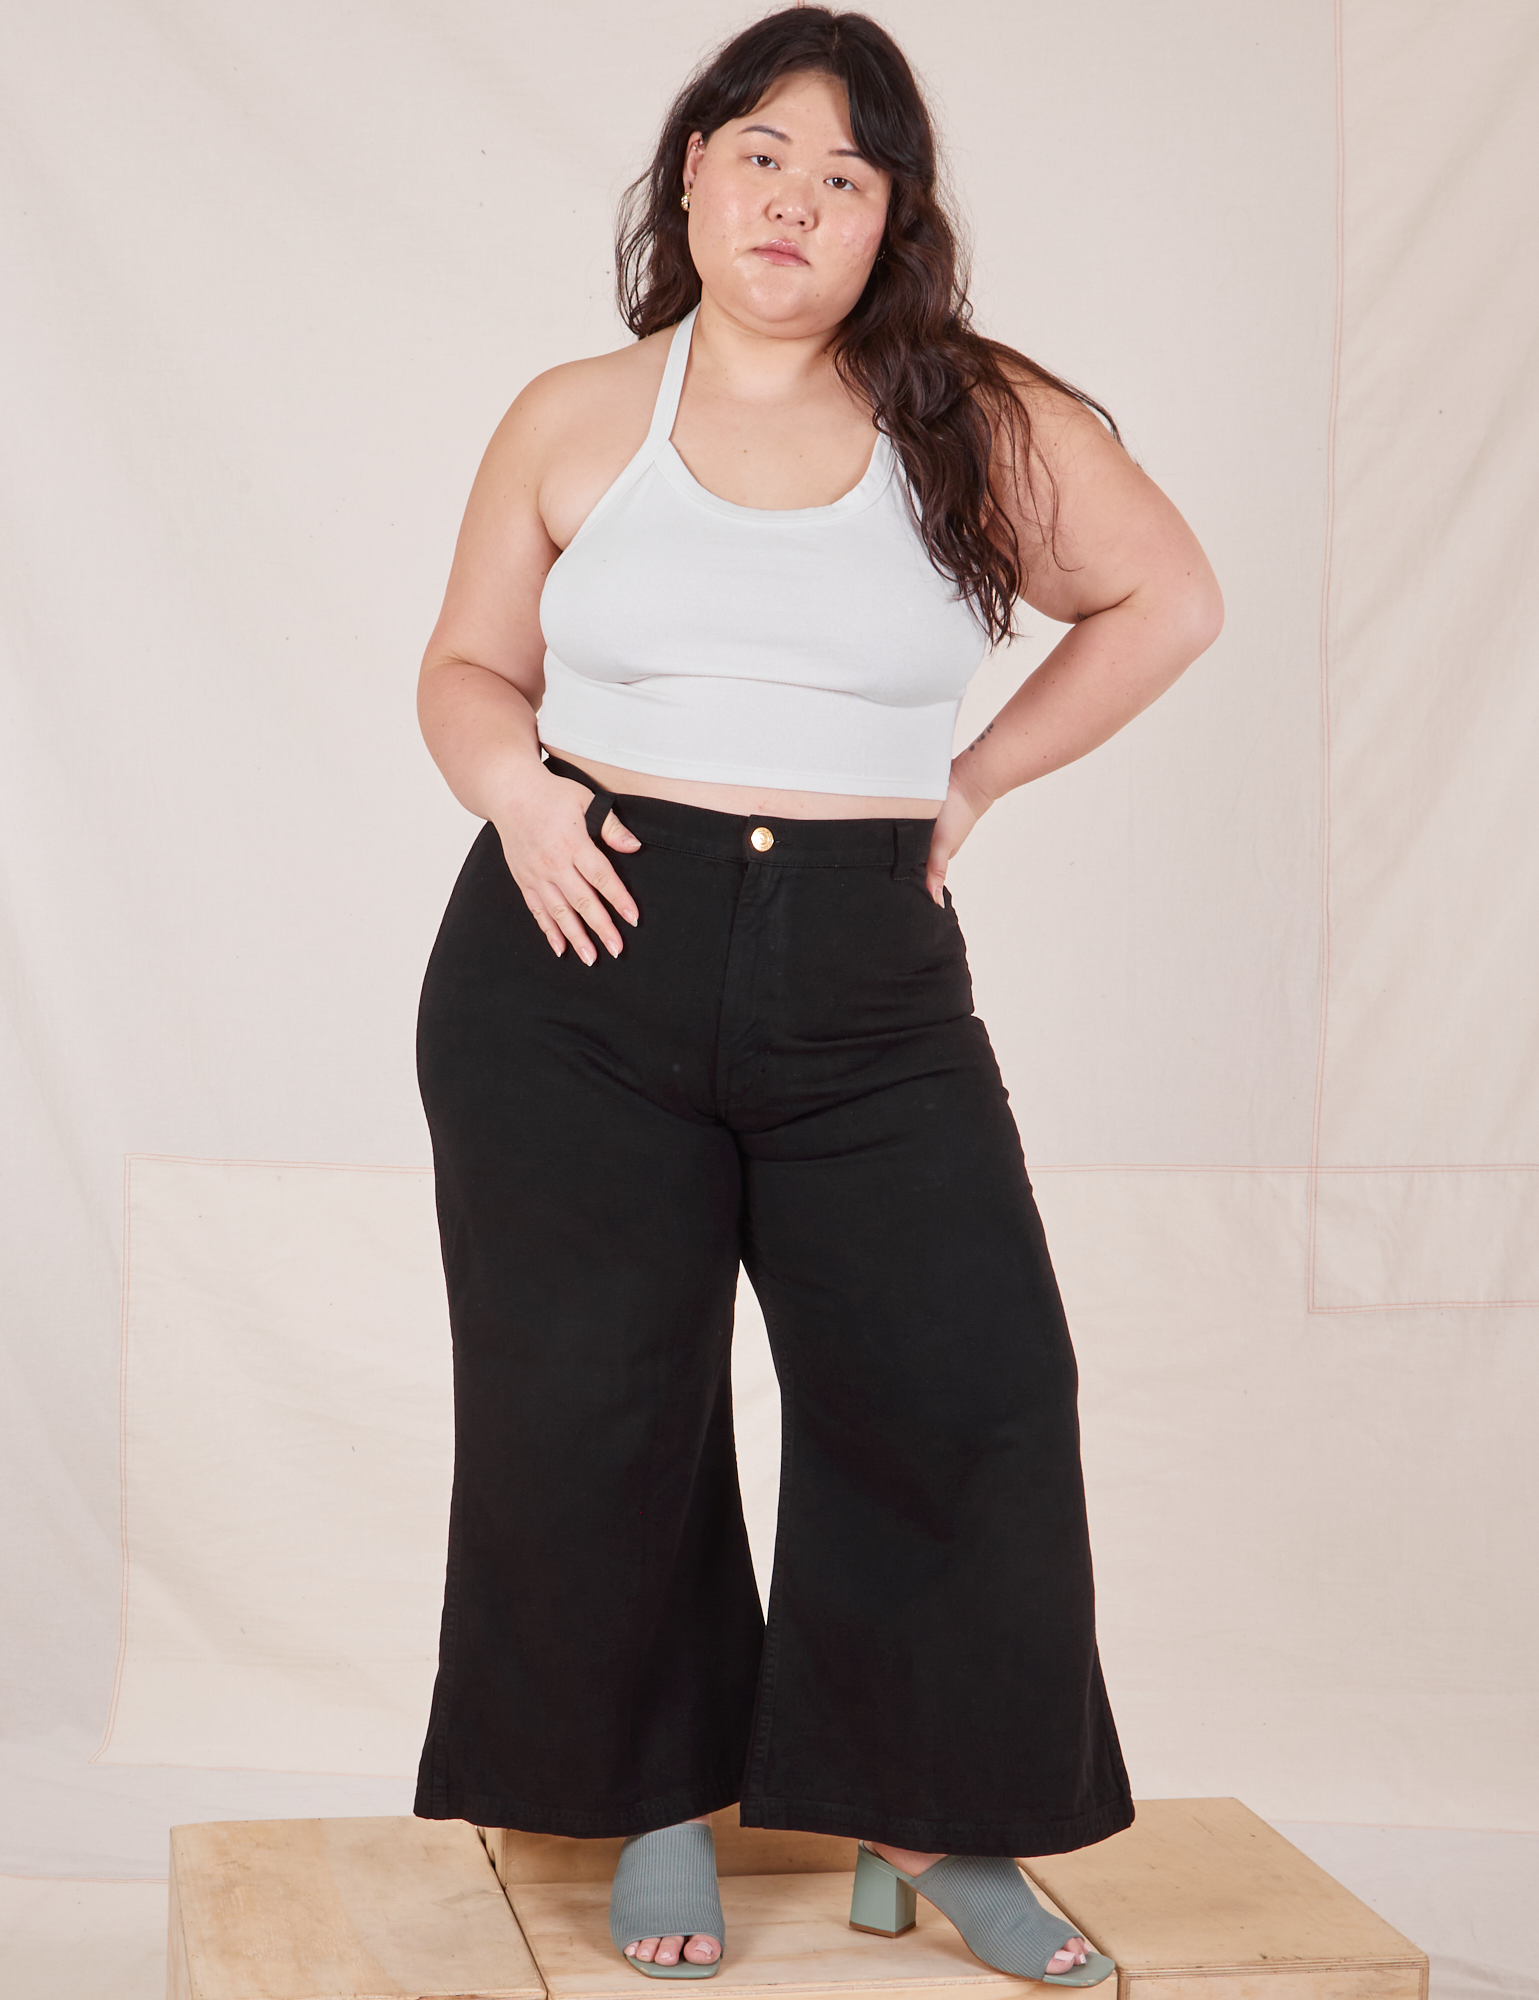 Ashley is 5&#39;7&quot; and wearing 1XL Petite Bell Bottoms in Basic Black paired with a Halter Top in vintage off-white